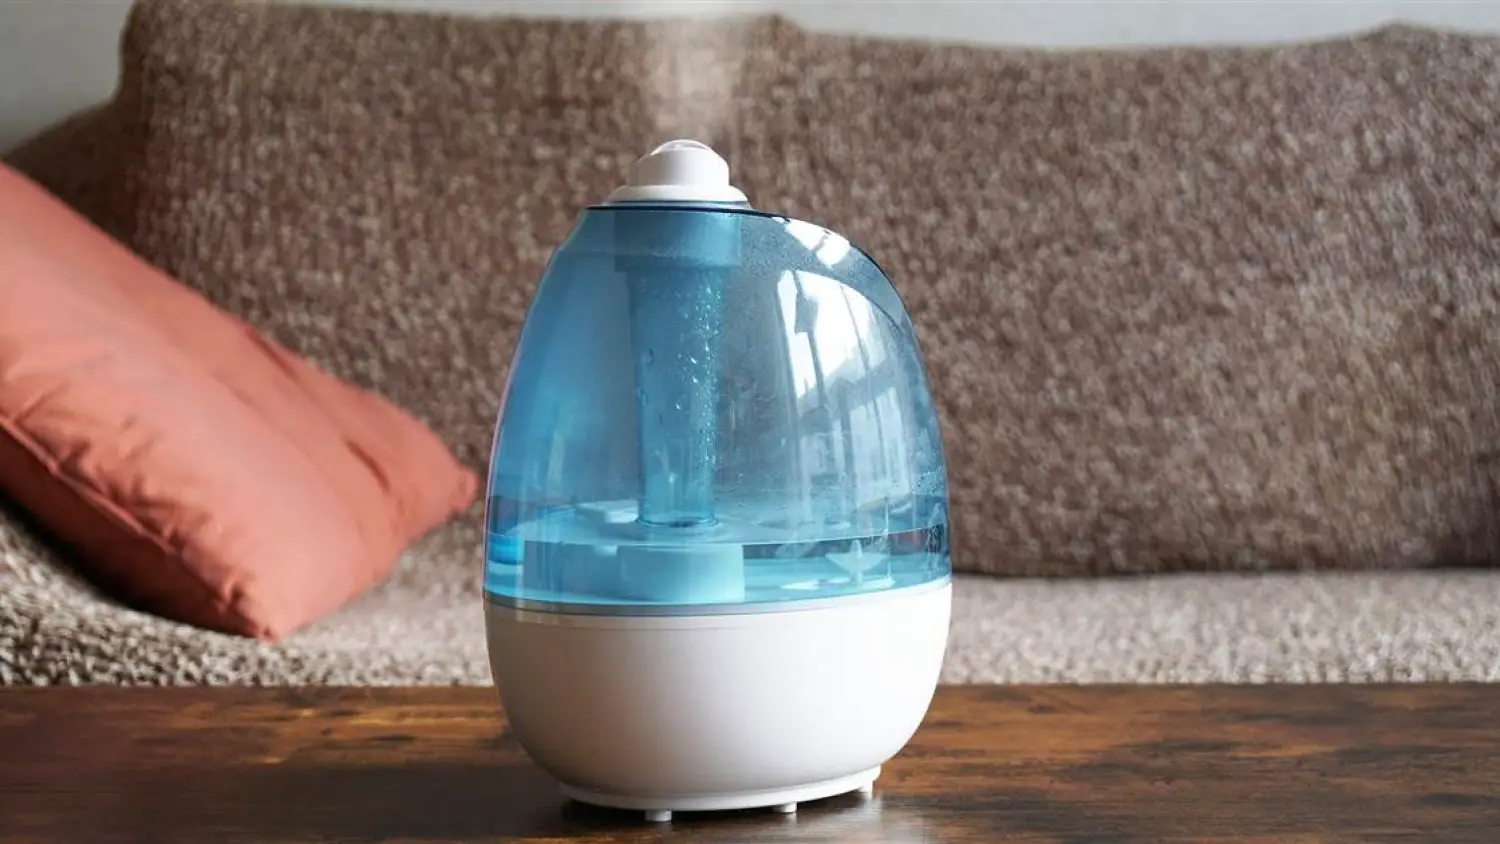 Best Humidifier Reviews: 5 Popular Models that Will Boost Your Life Quality